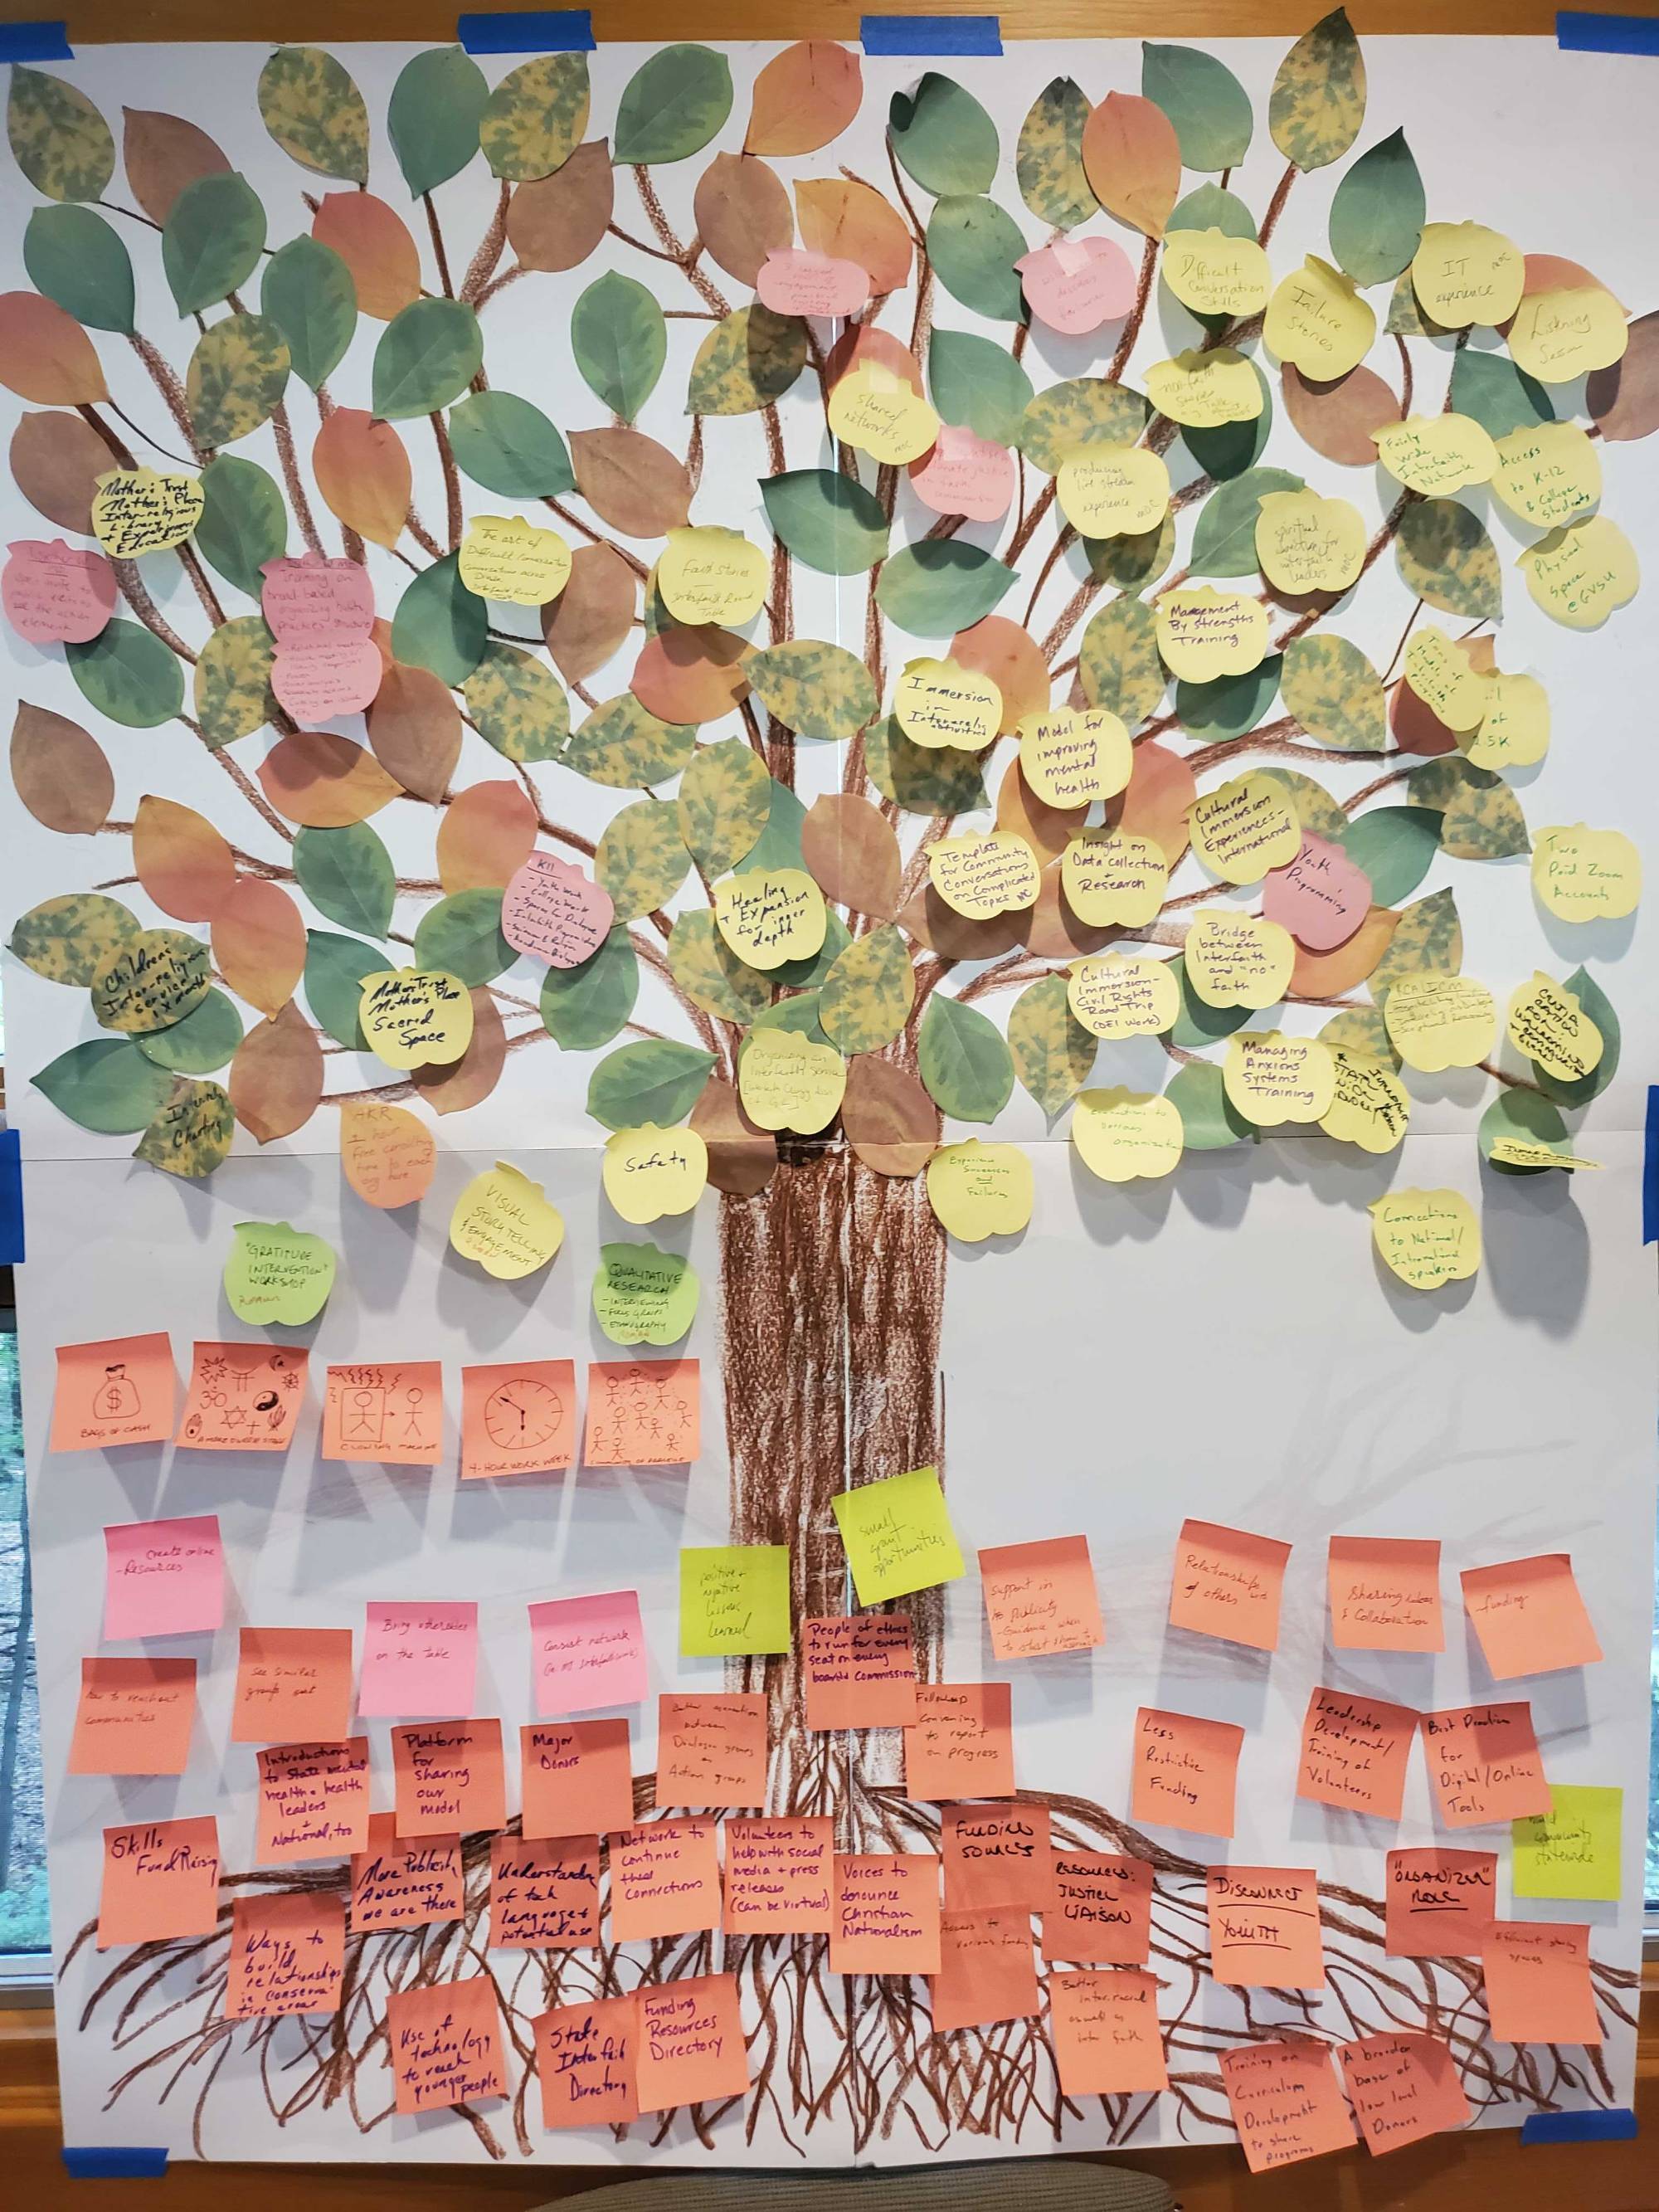 A drawing of a tree with post-it notes representing resources as fruit and needs as roots